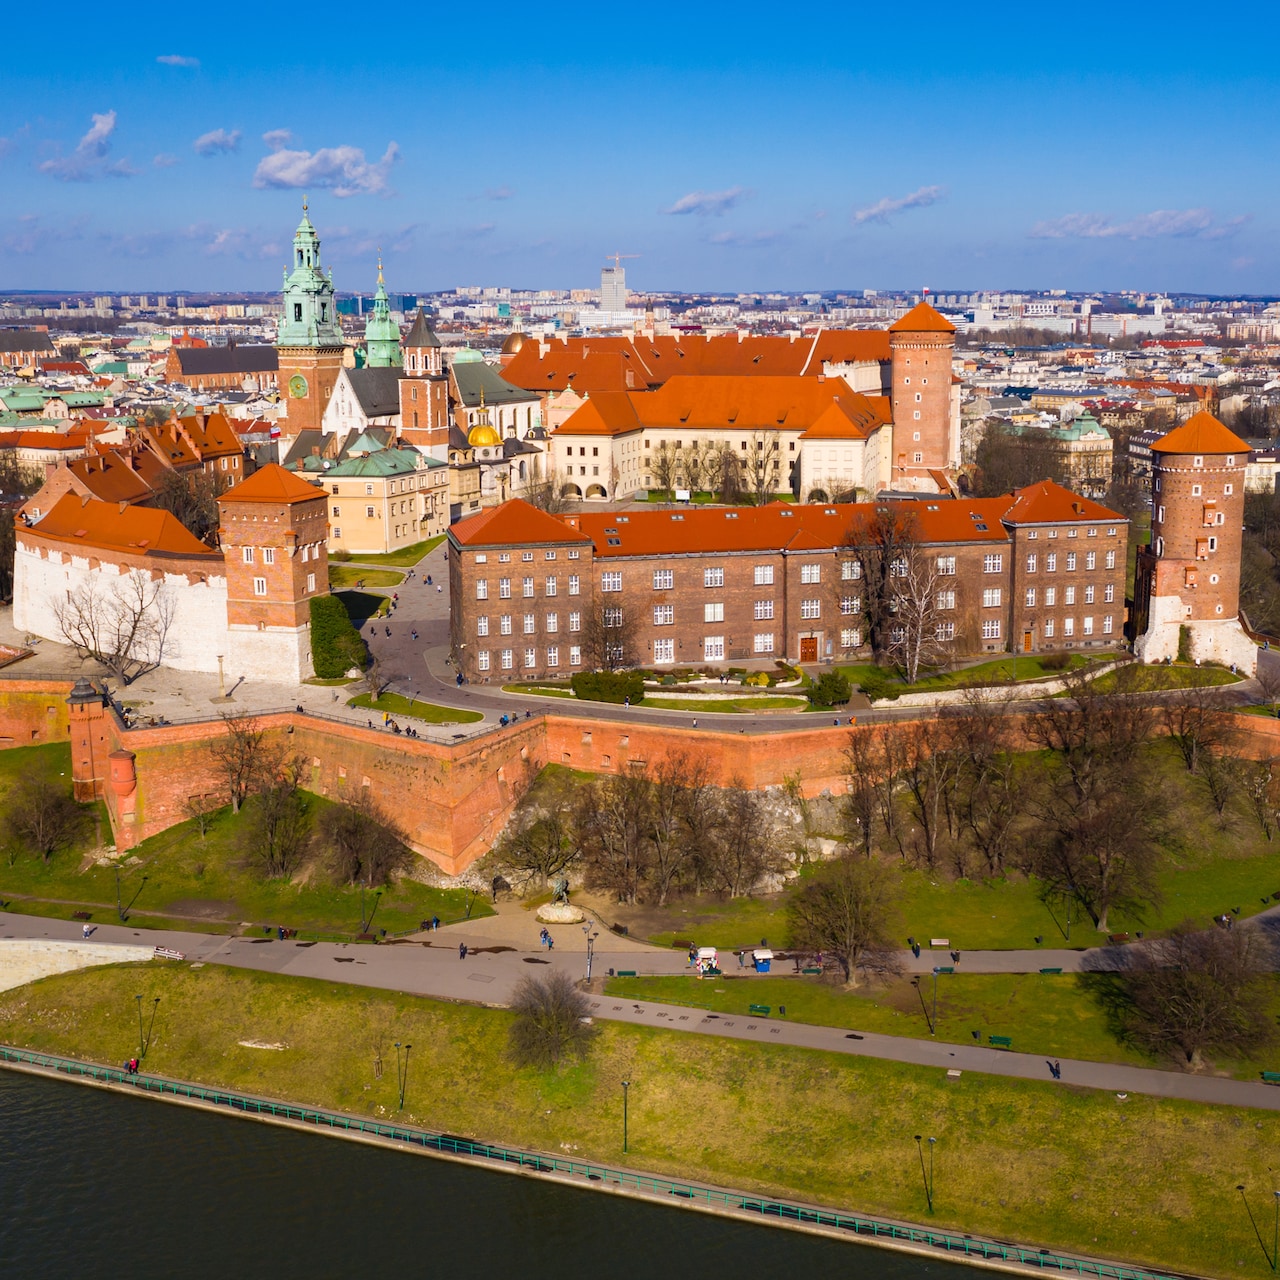 Wawel Castle on a hill, surrounded by the city of Krakow